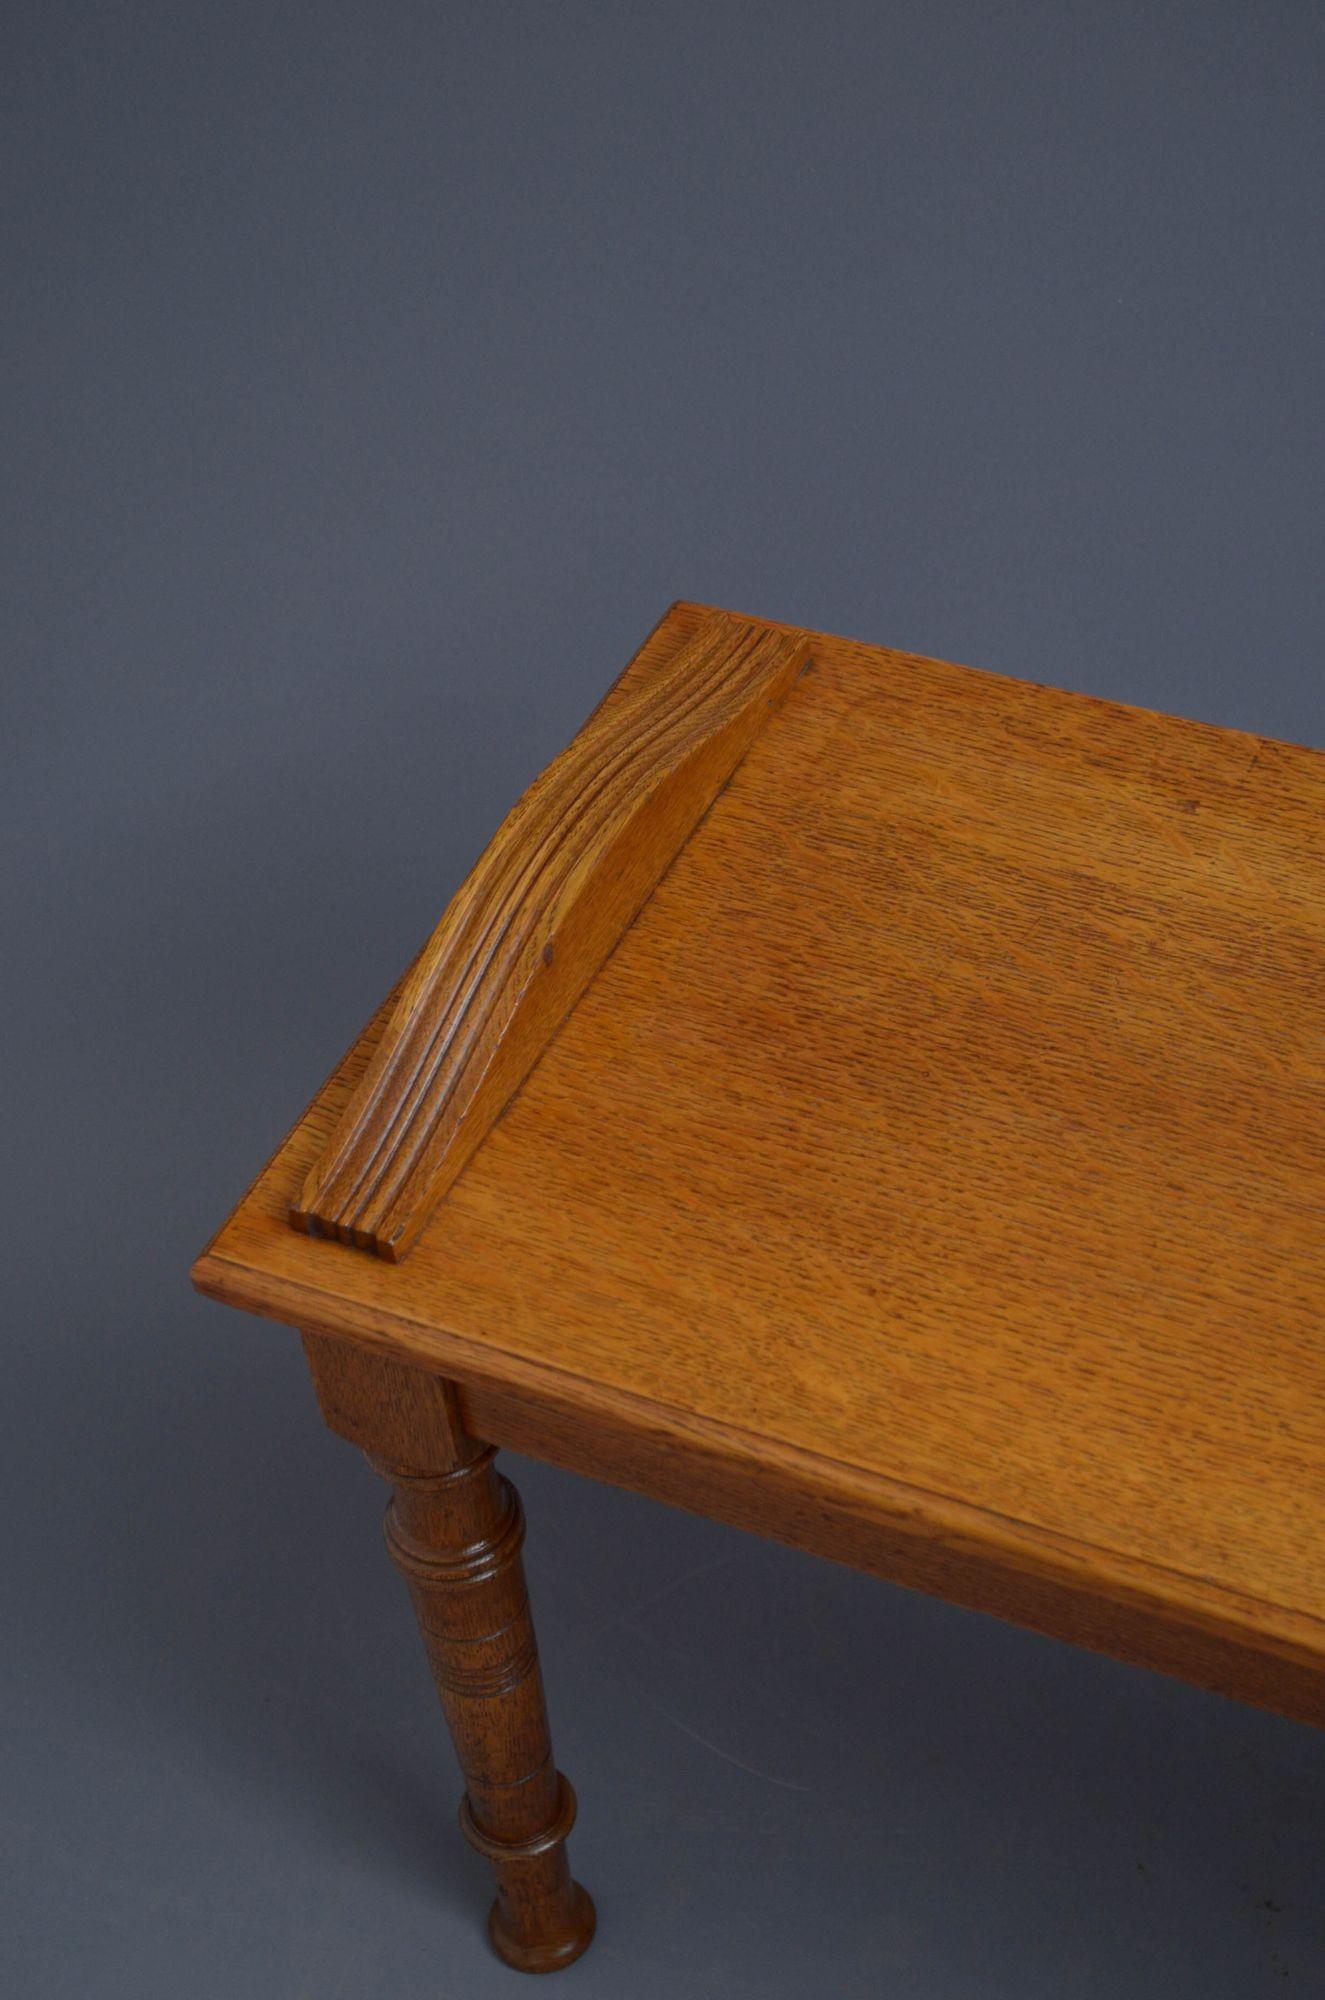 Sn5340 Edwardian oak hall bench, having shaped ends and moulded seat, standing on turned and tapered legs. This antique hall bench is in home ready condition. c1900
Measures: H 17